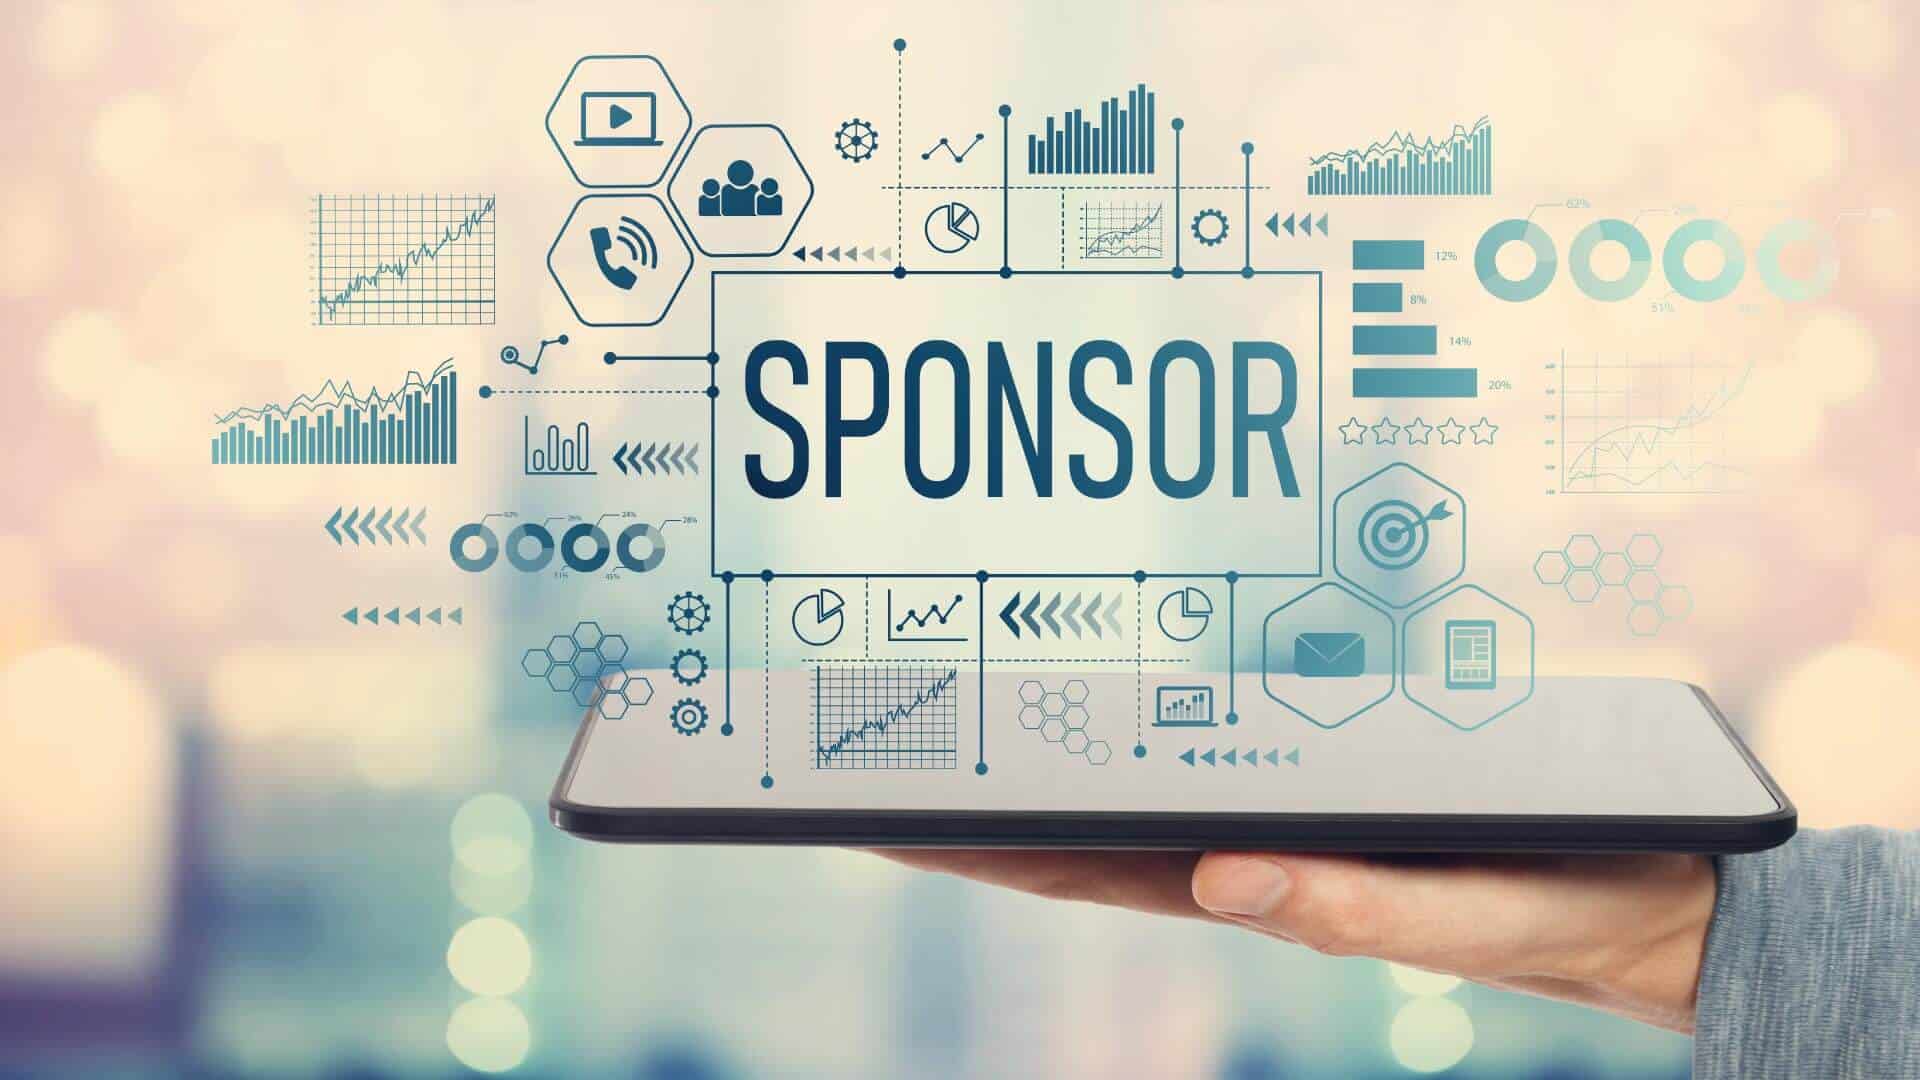 This is a representation of sponsors in a vector format